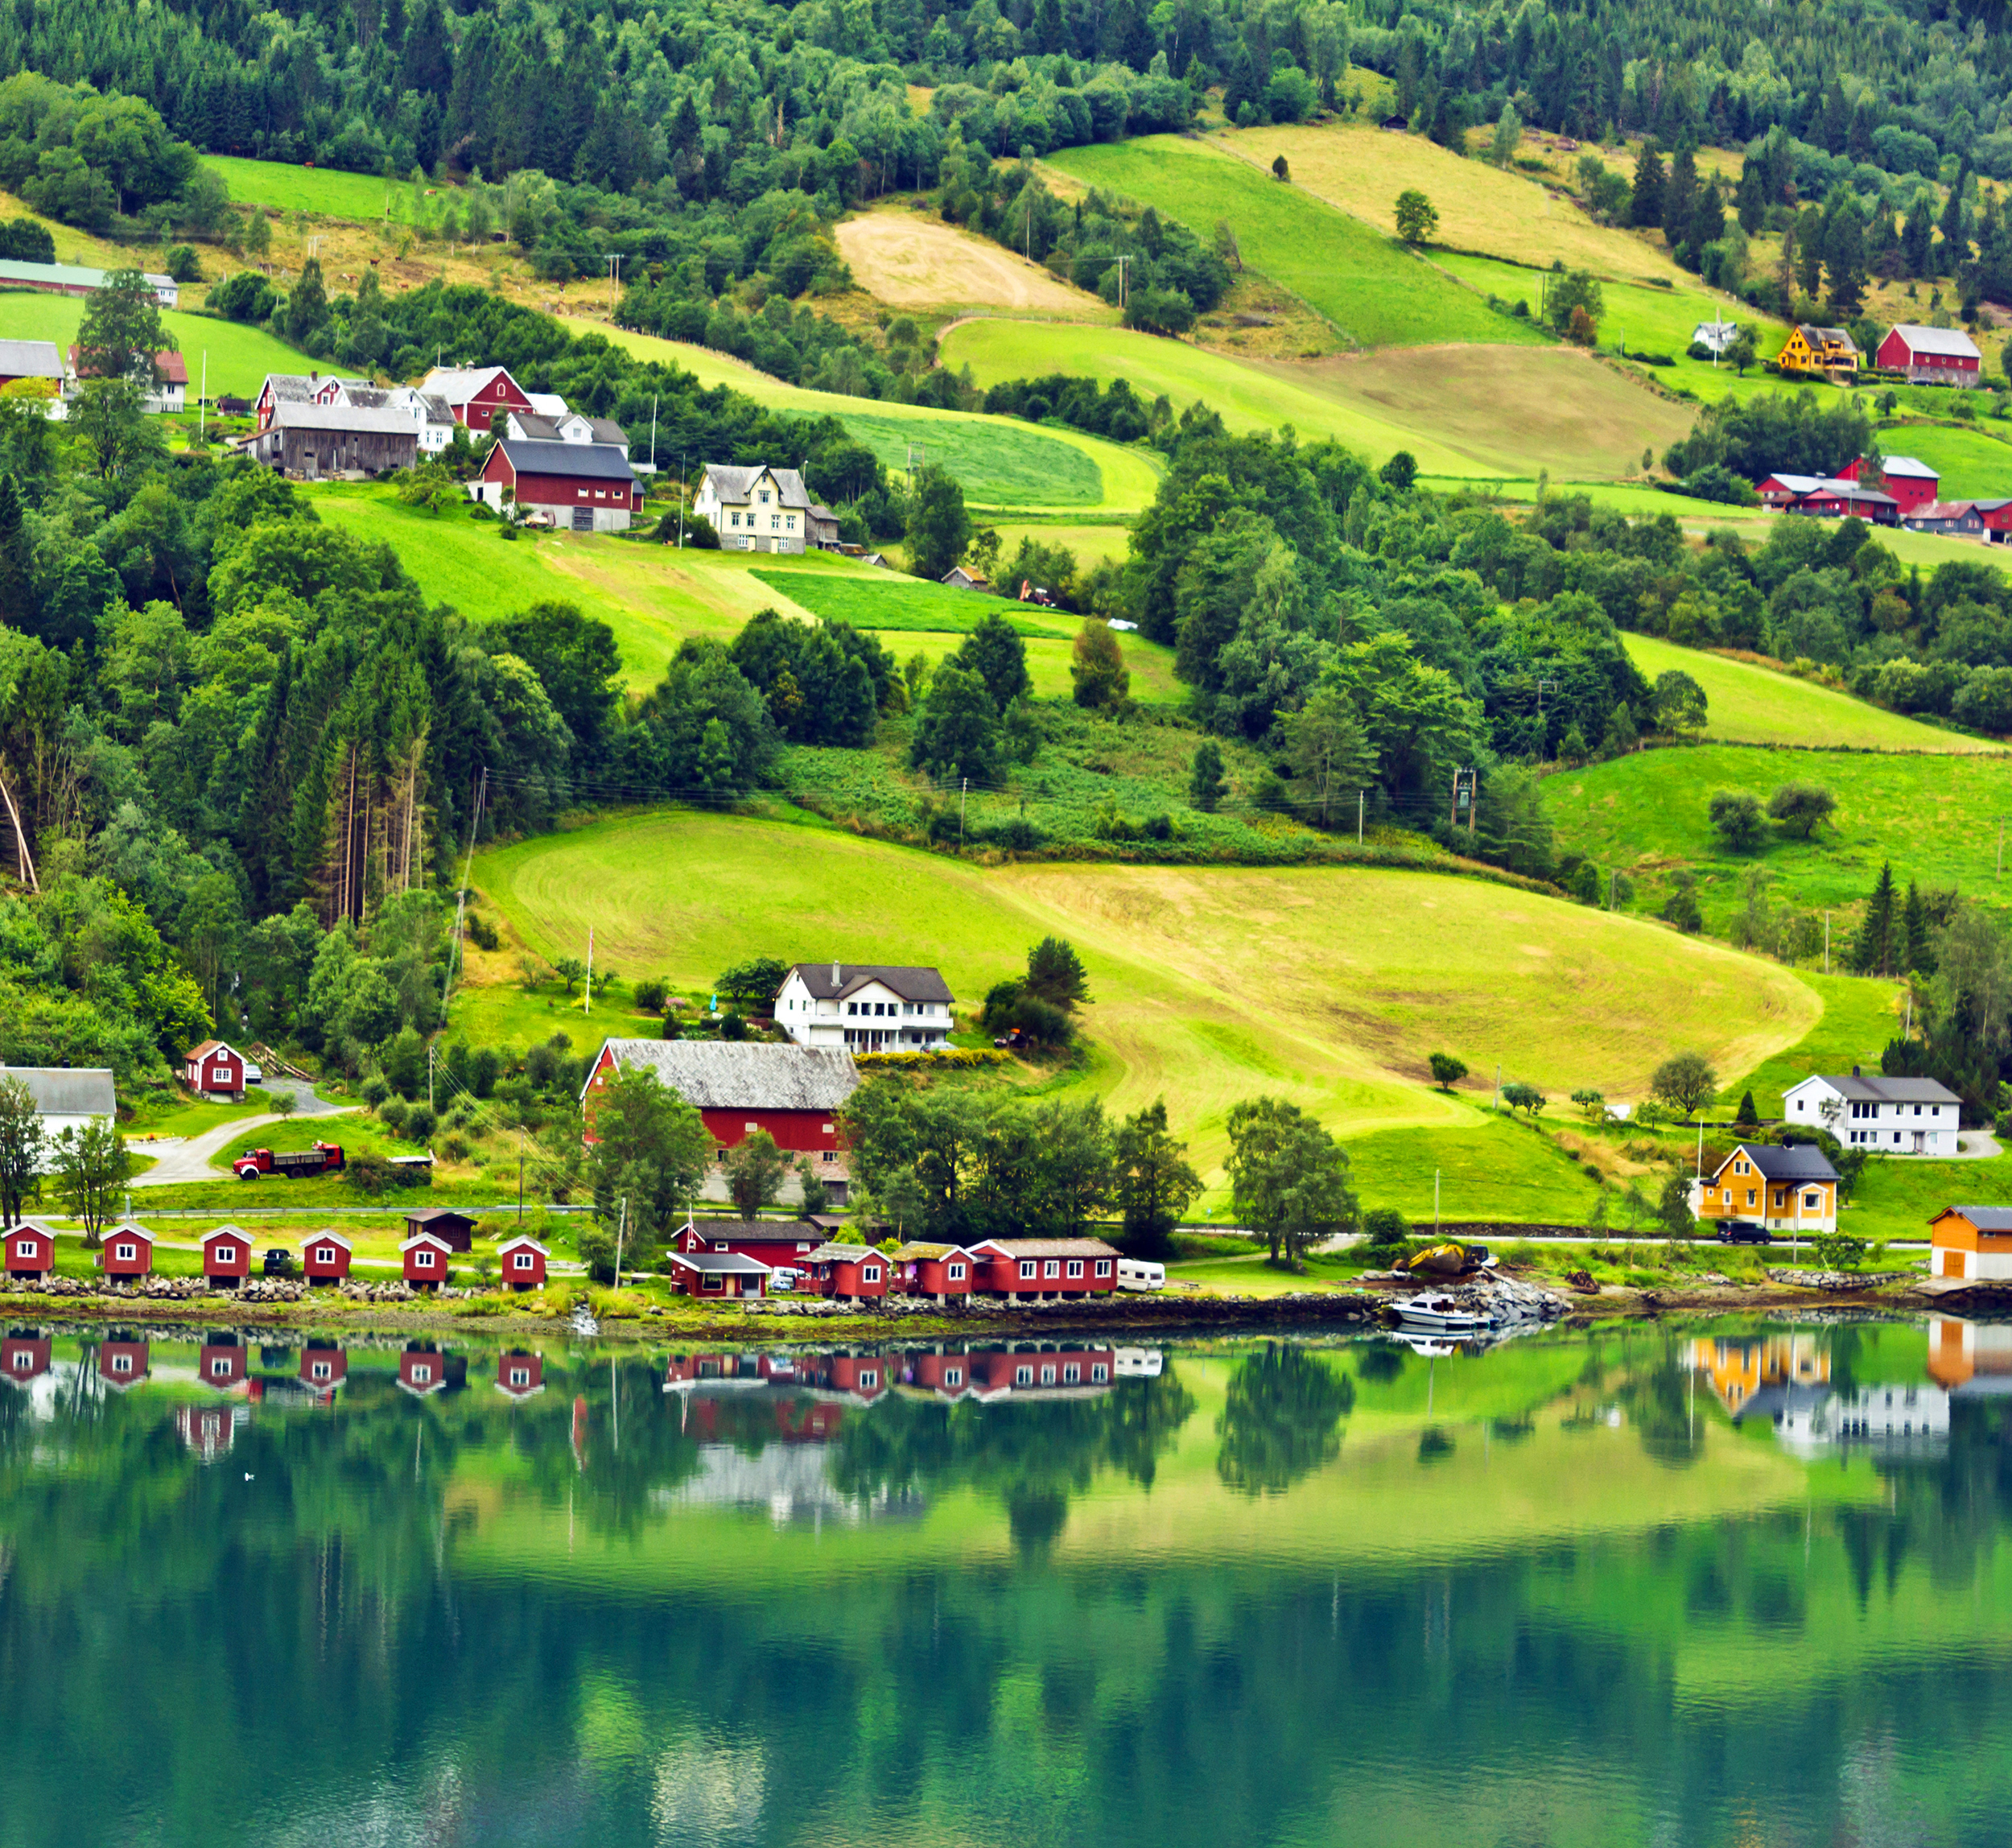 My Travel Guide to Norway - Olden, Norway